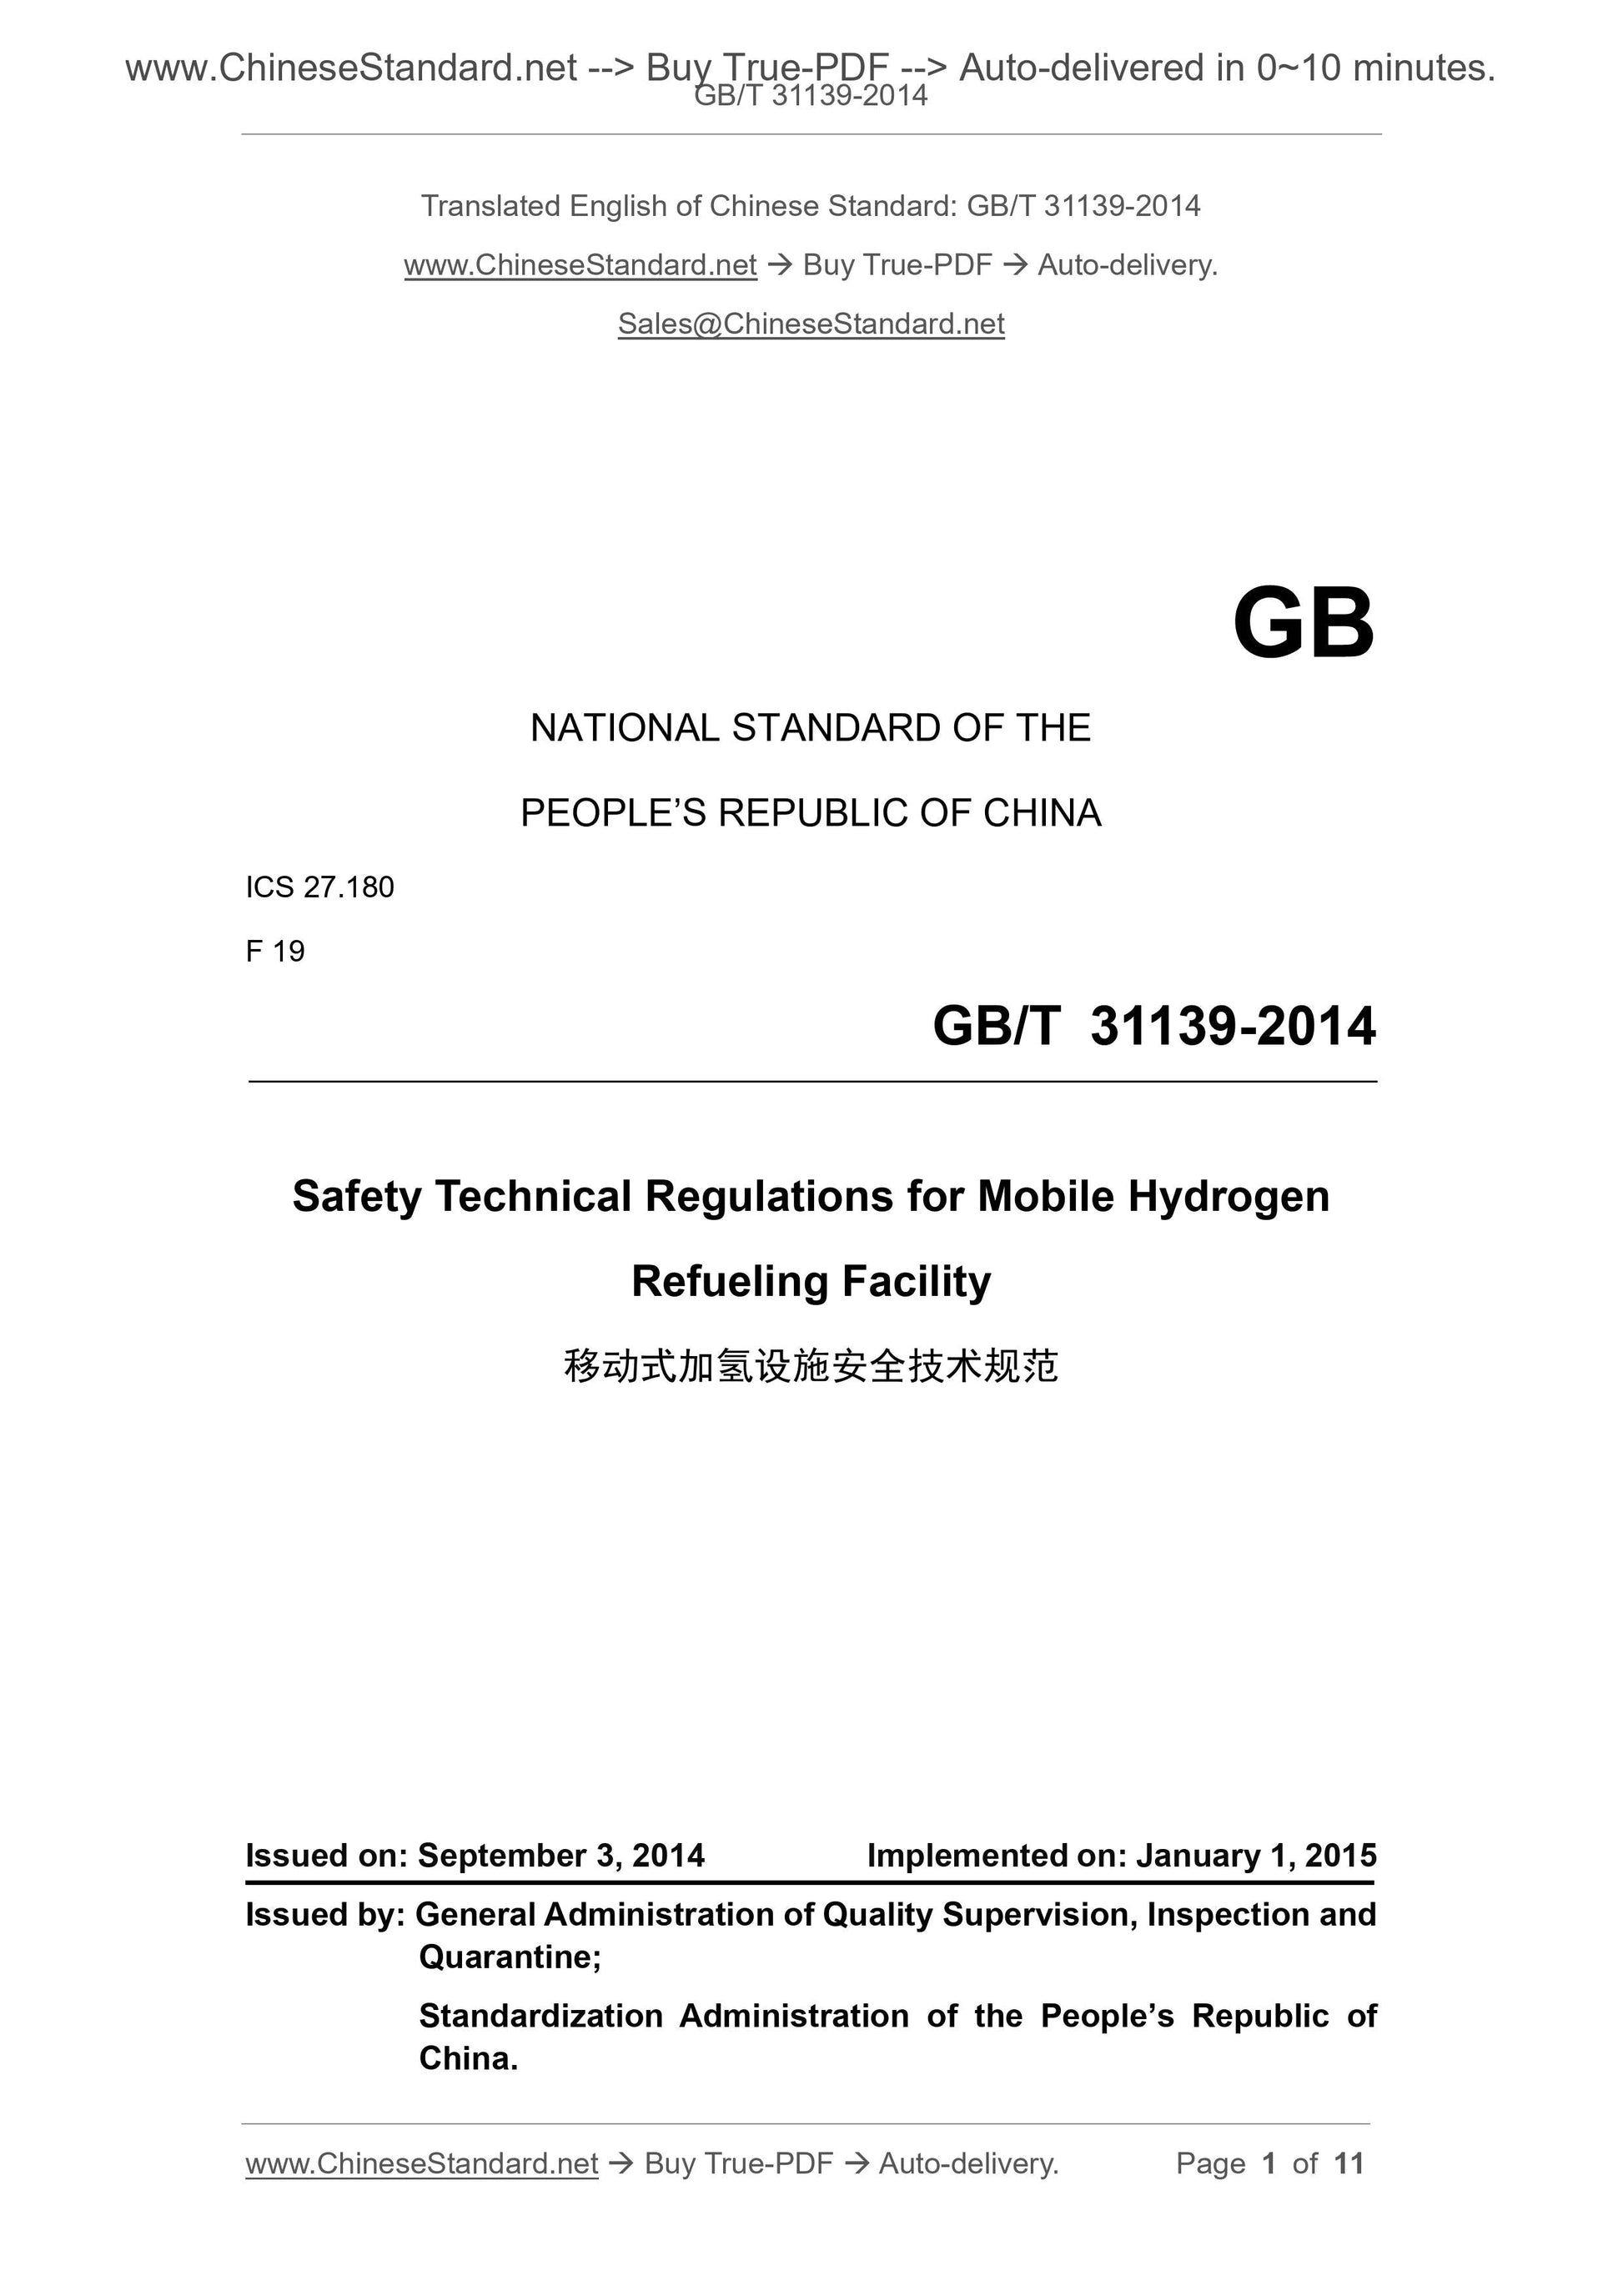 GB/T 31139-2014 Page 1